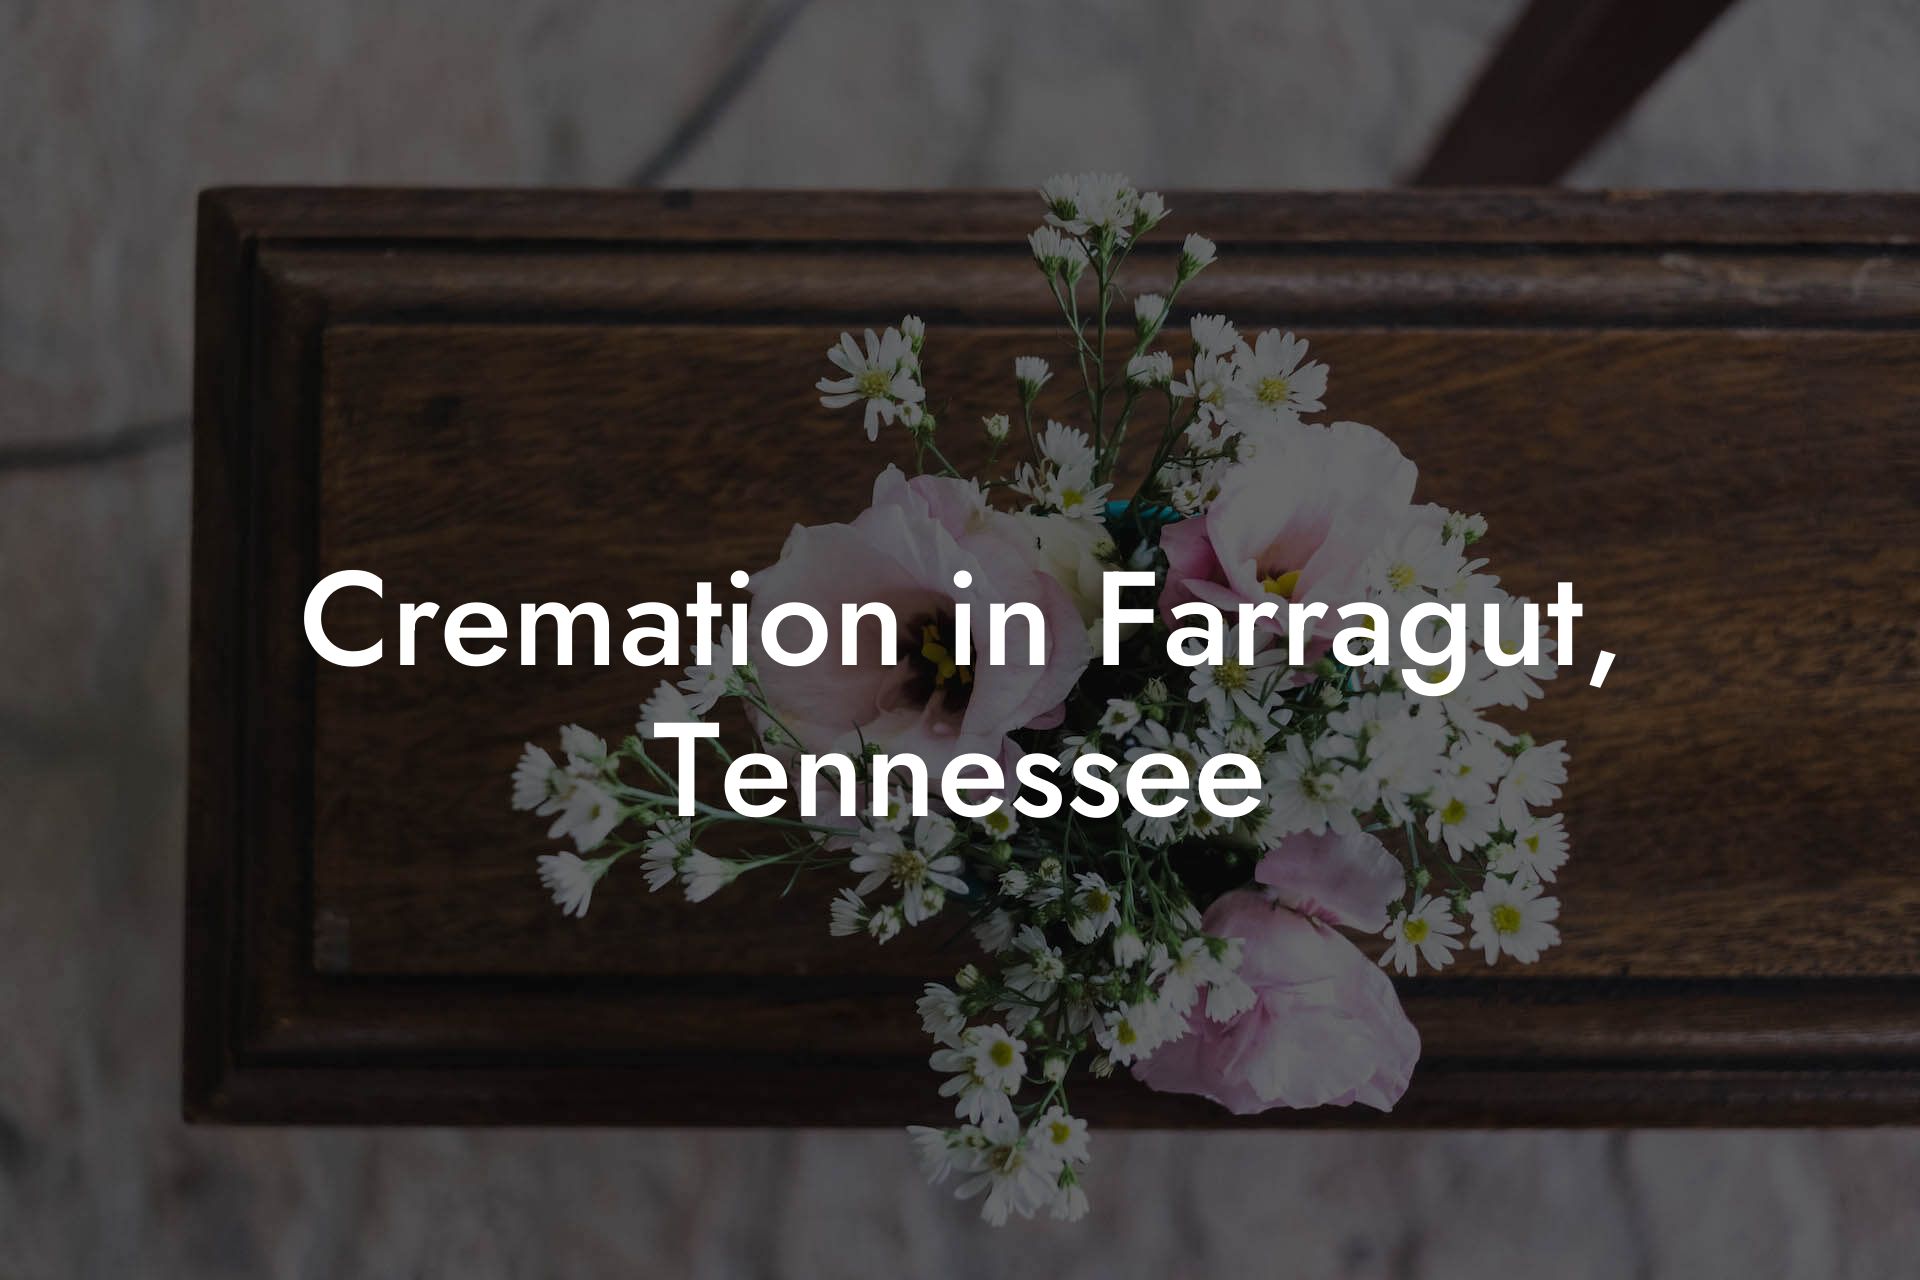 Cremation in Farragut, Tennessee